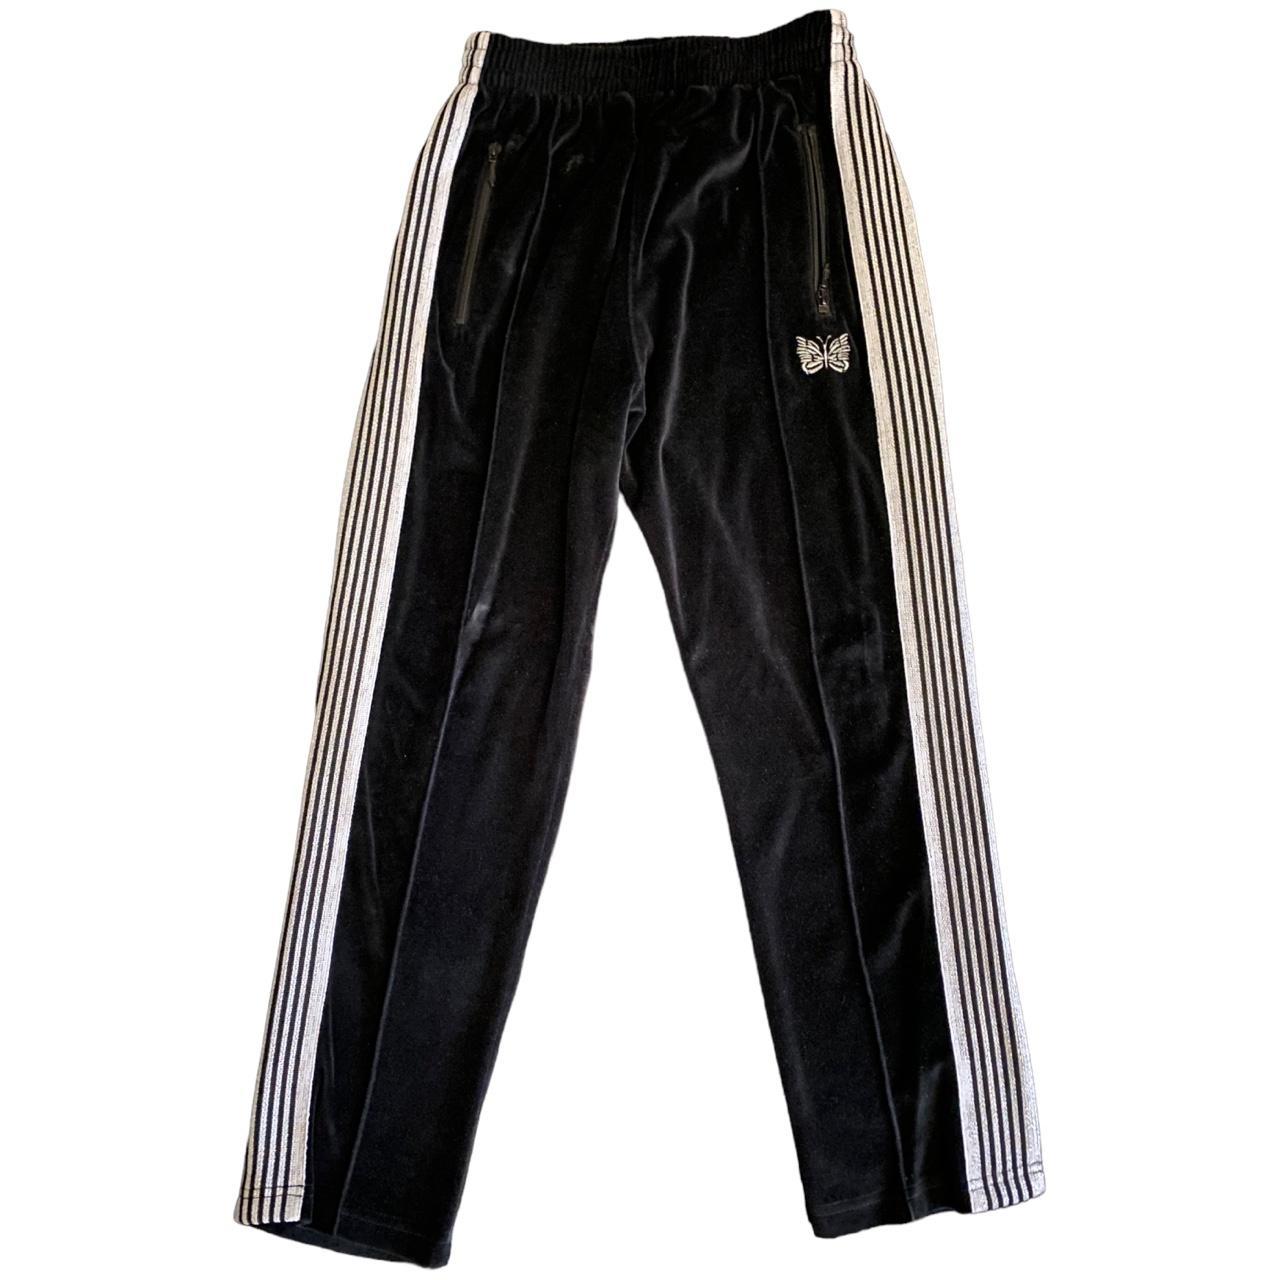 Needles Men's Black and Silver Joggers-tracksuits